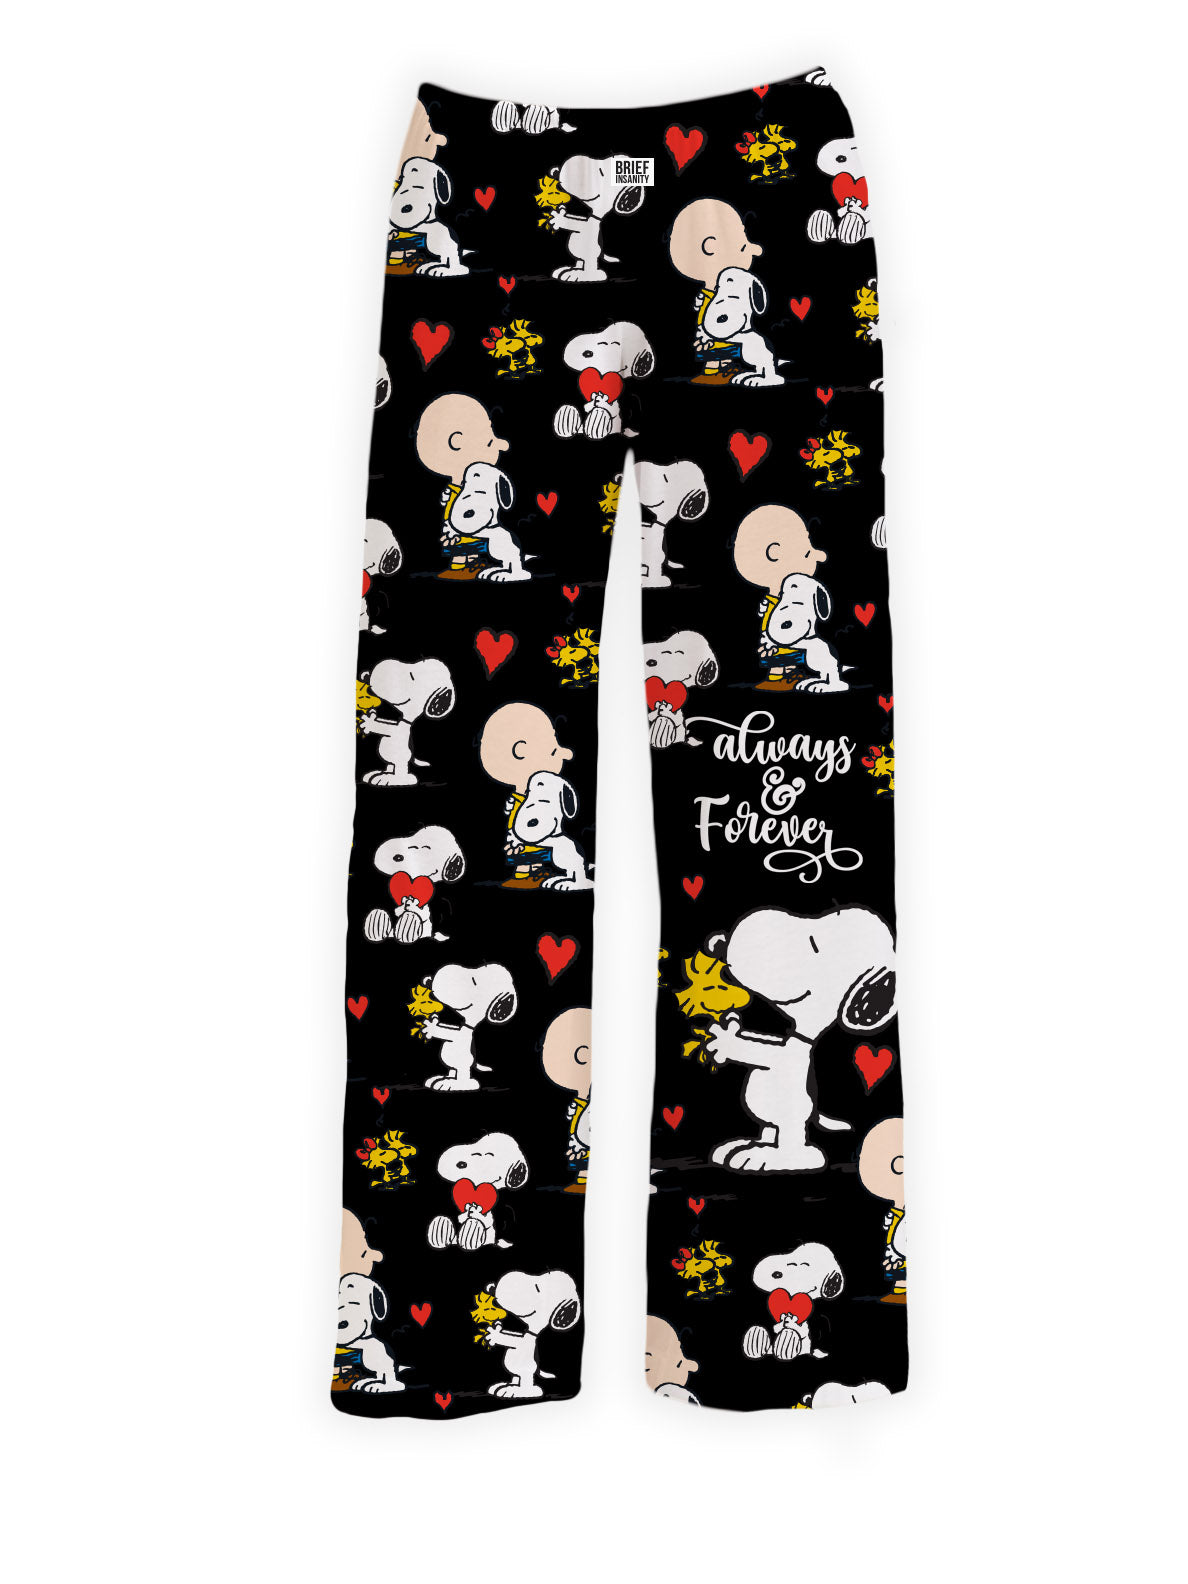 BRIEF INSANITY's Always & Forever Pajama Lounge Pants